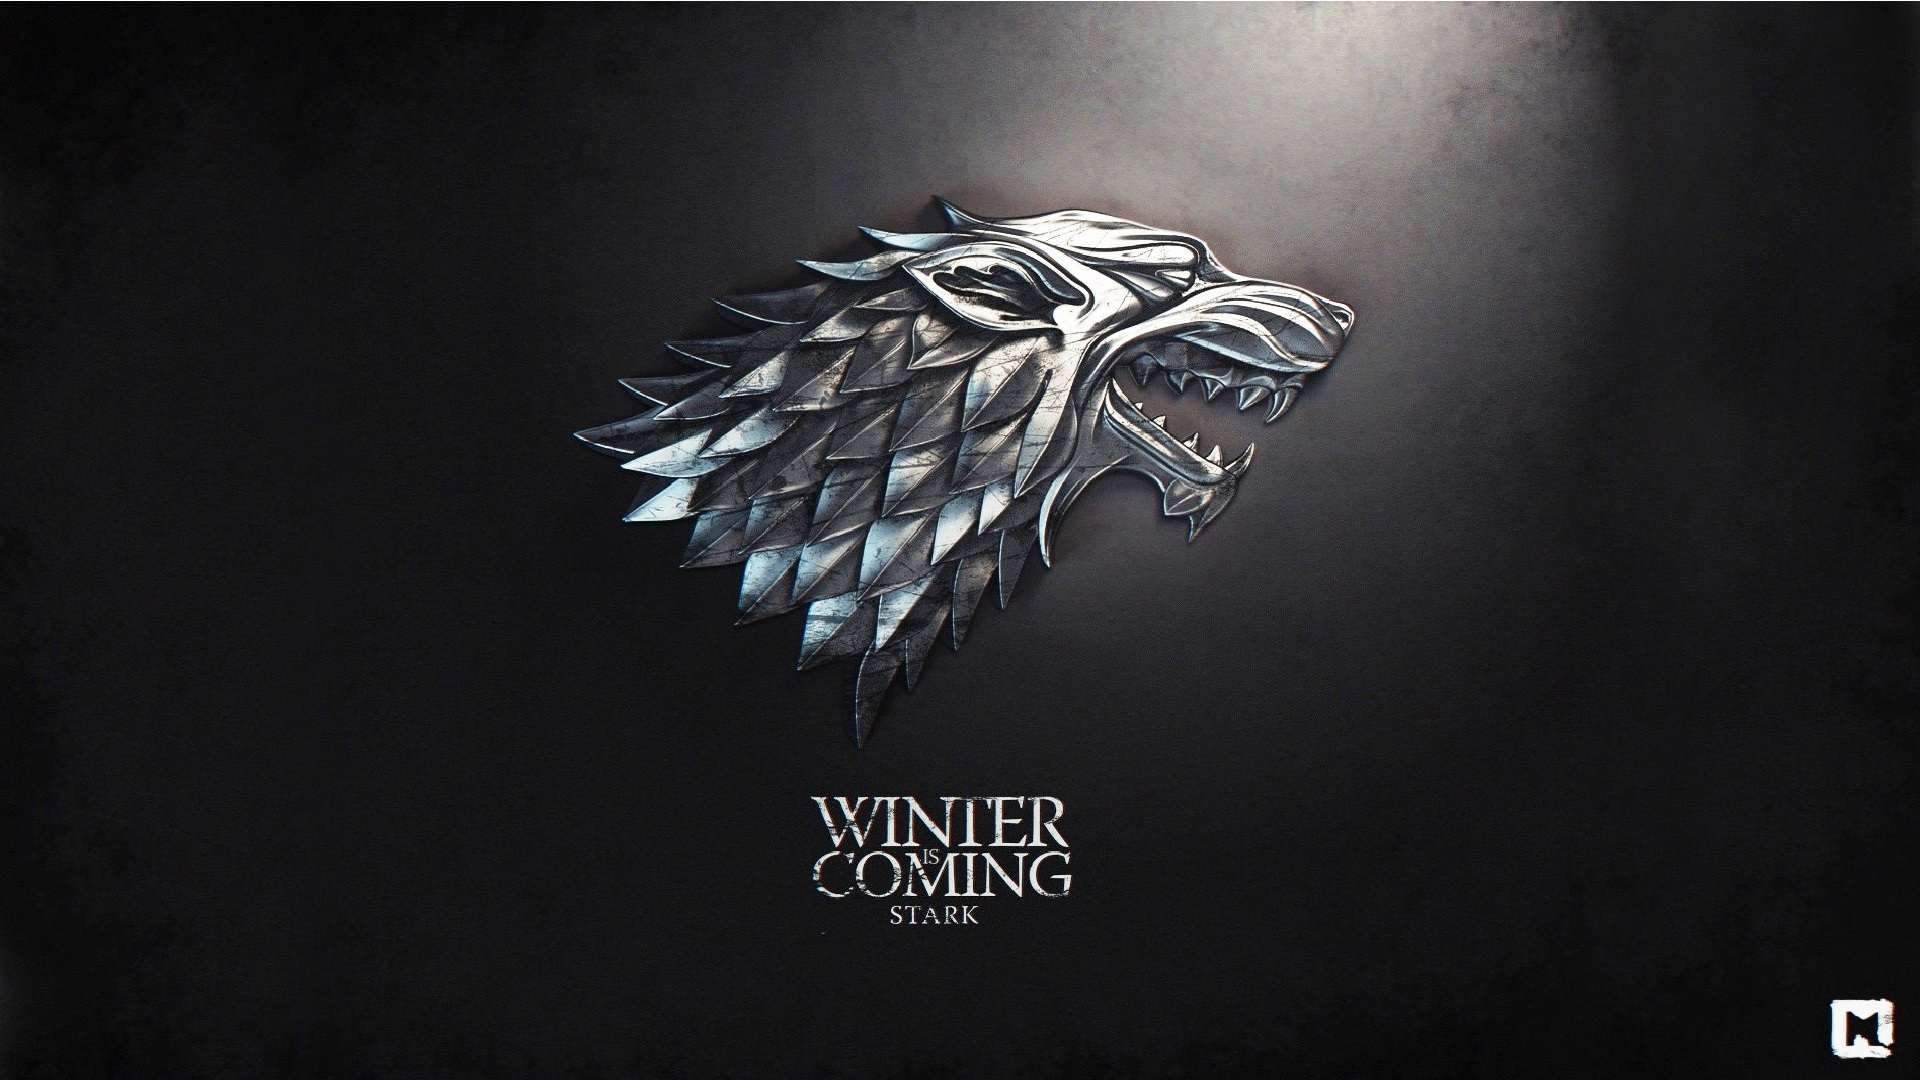 House Stark Game of Thrones Wallpaper HD with high-resolution 1920x1080 pixel. You can use this wallpaper for your Desktop Computer Backgrounds, Mac Wallpapers, Android Lock screen or iPhone Screensavers and another smartphone device